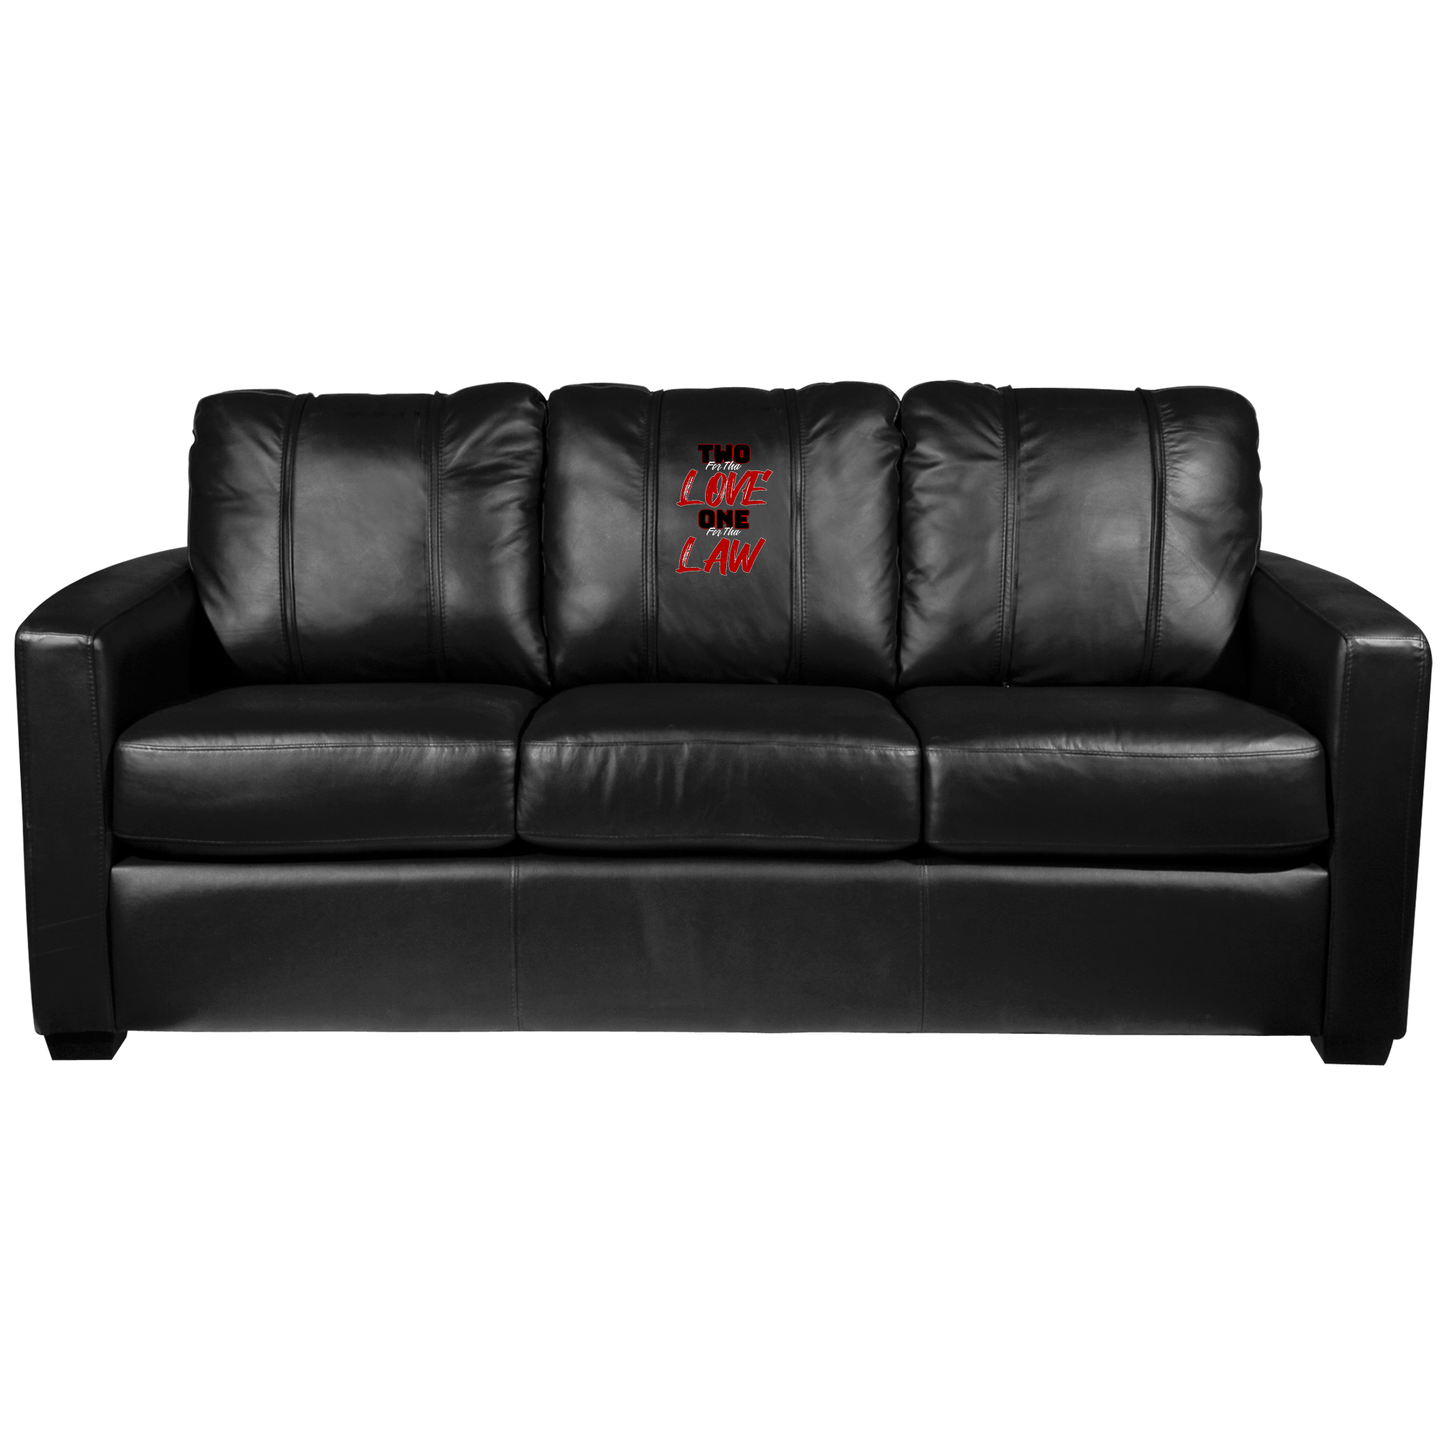 Stationary Loveseat with Two For Tha Love One For Tha Law  Logo